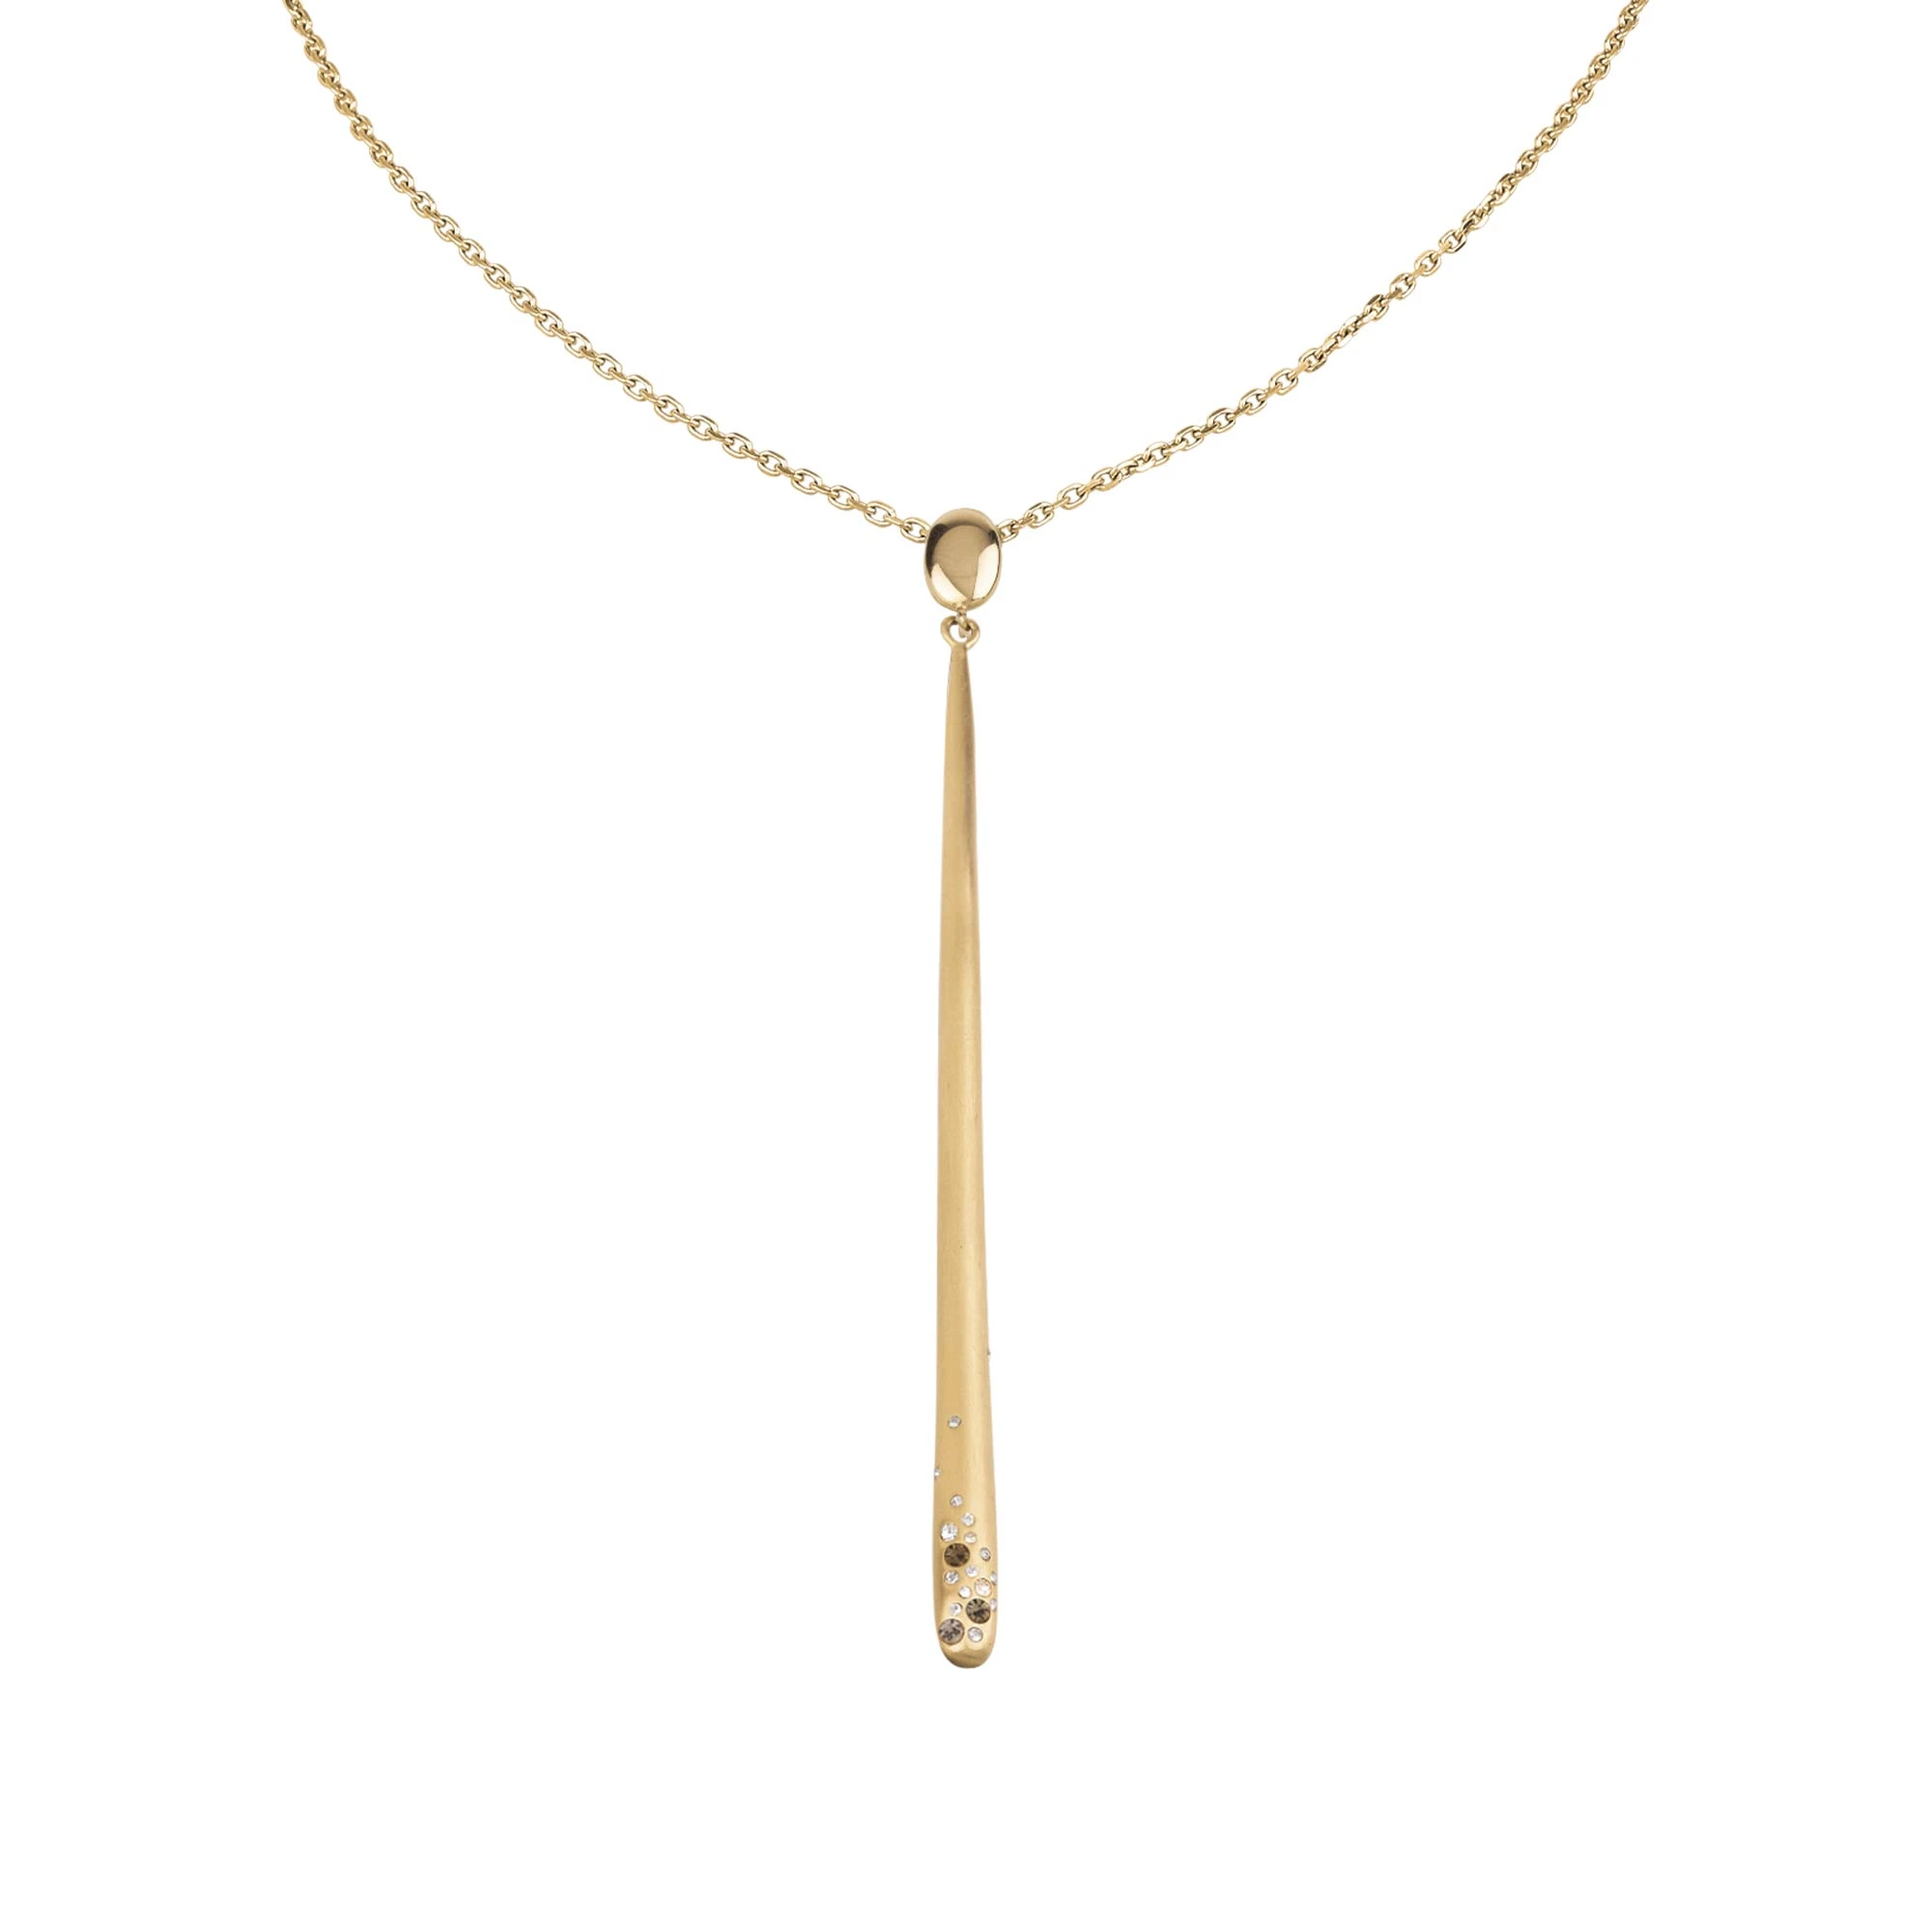 ILLUSION - SATIN IP LIGHT GOLD STAINLESS STEEL NECKLACE WITH DROP SHAPE PENDANT AND CRYSTALS - 1 - TJ2704 | Breil